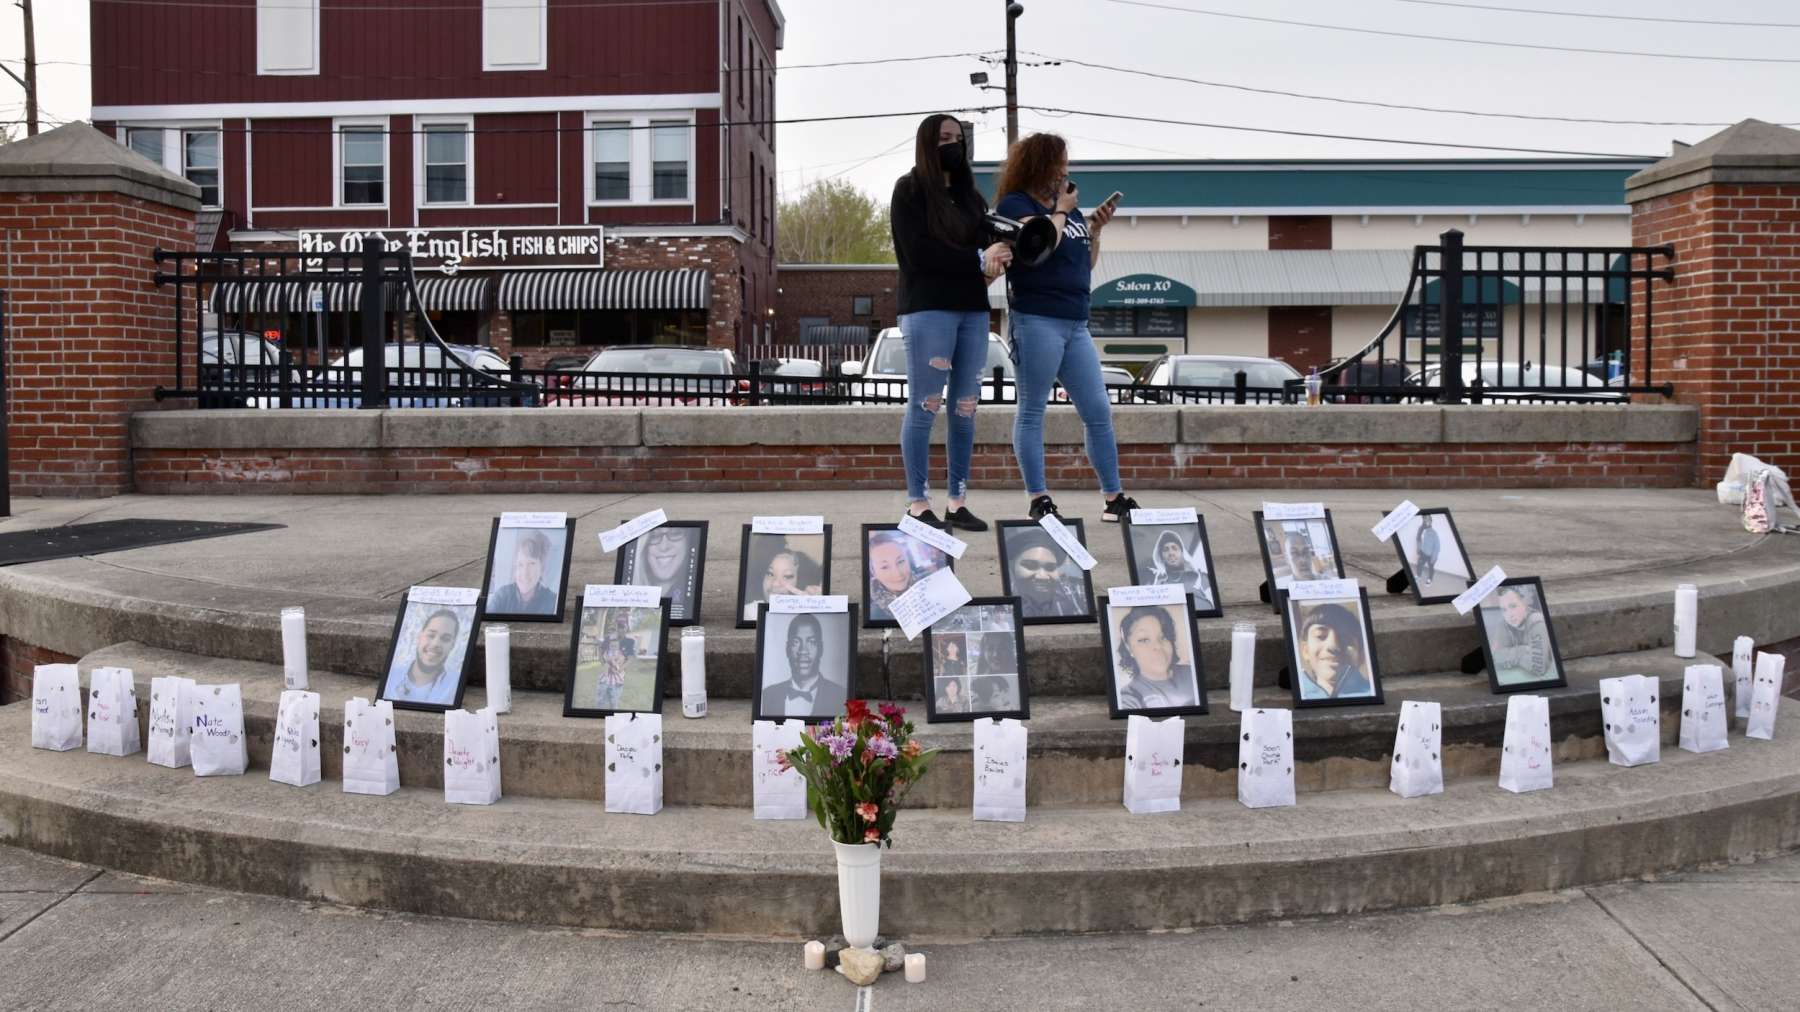 Youth led Village Vigil in Woonsocket urges peace, pleads for help